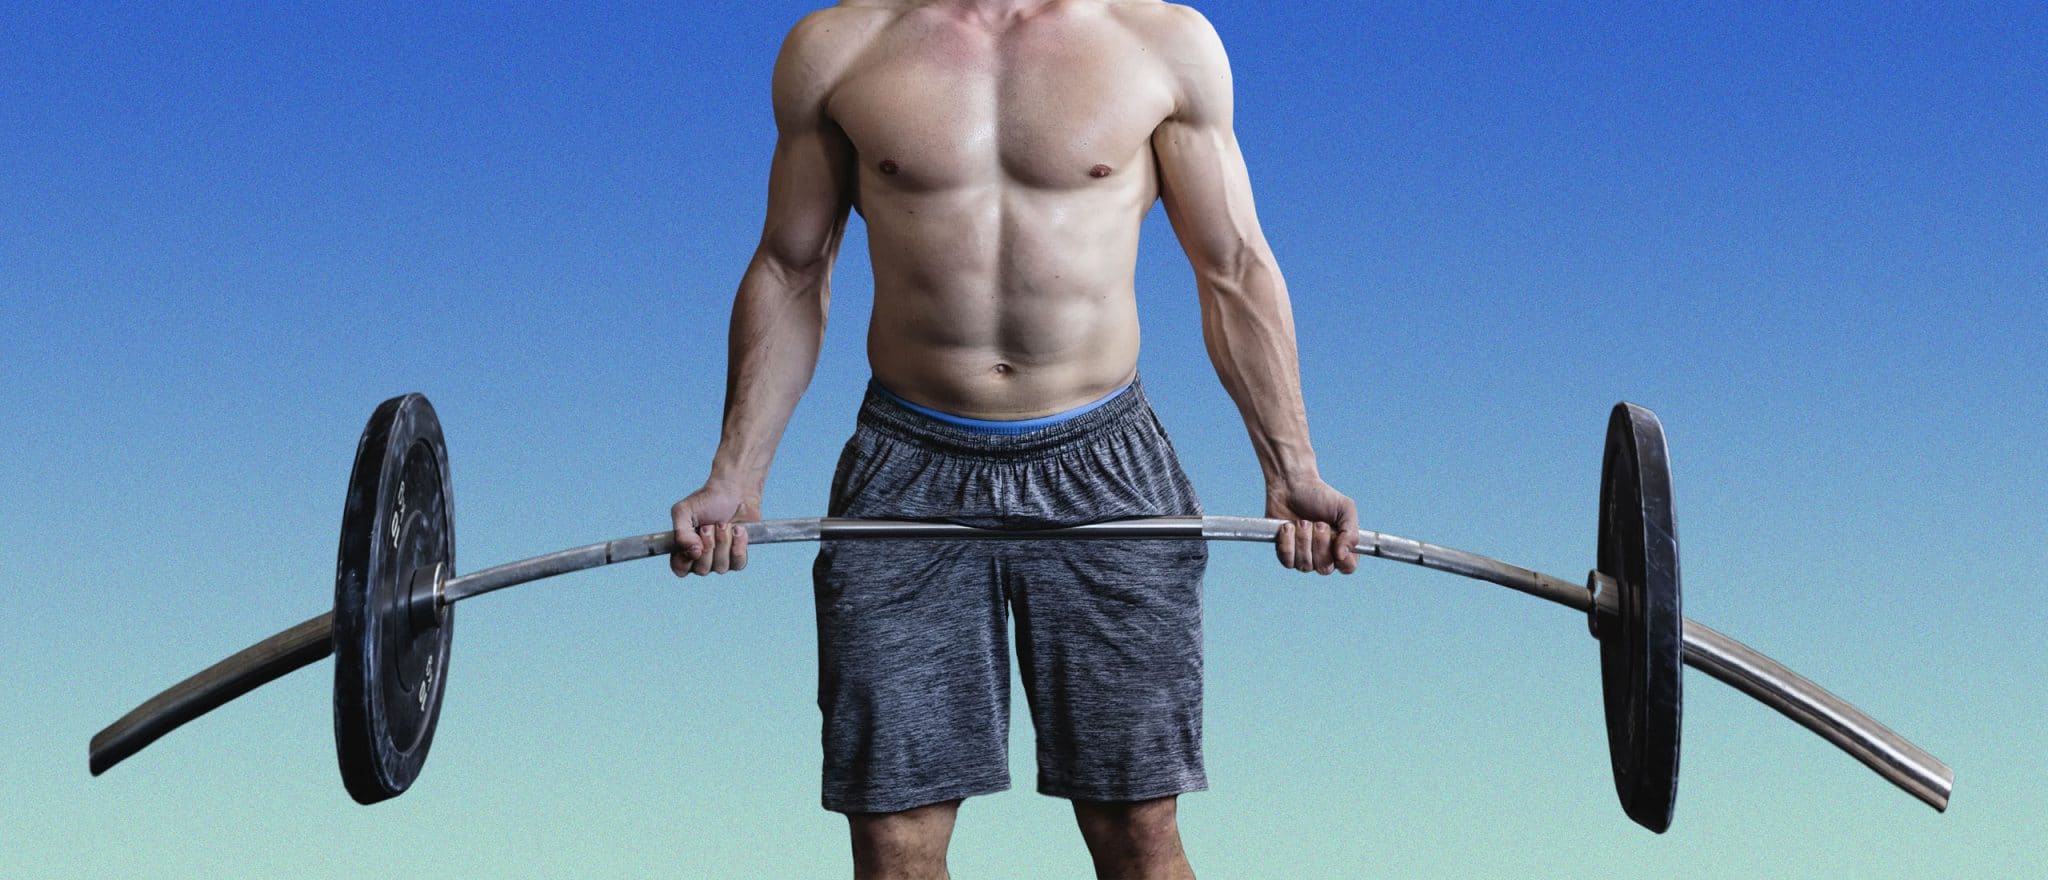 This Testosterone-Boosting Workout Could Cause ED